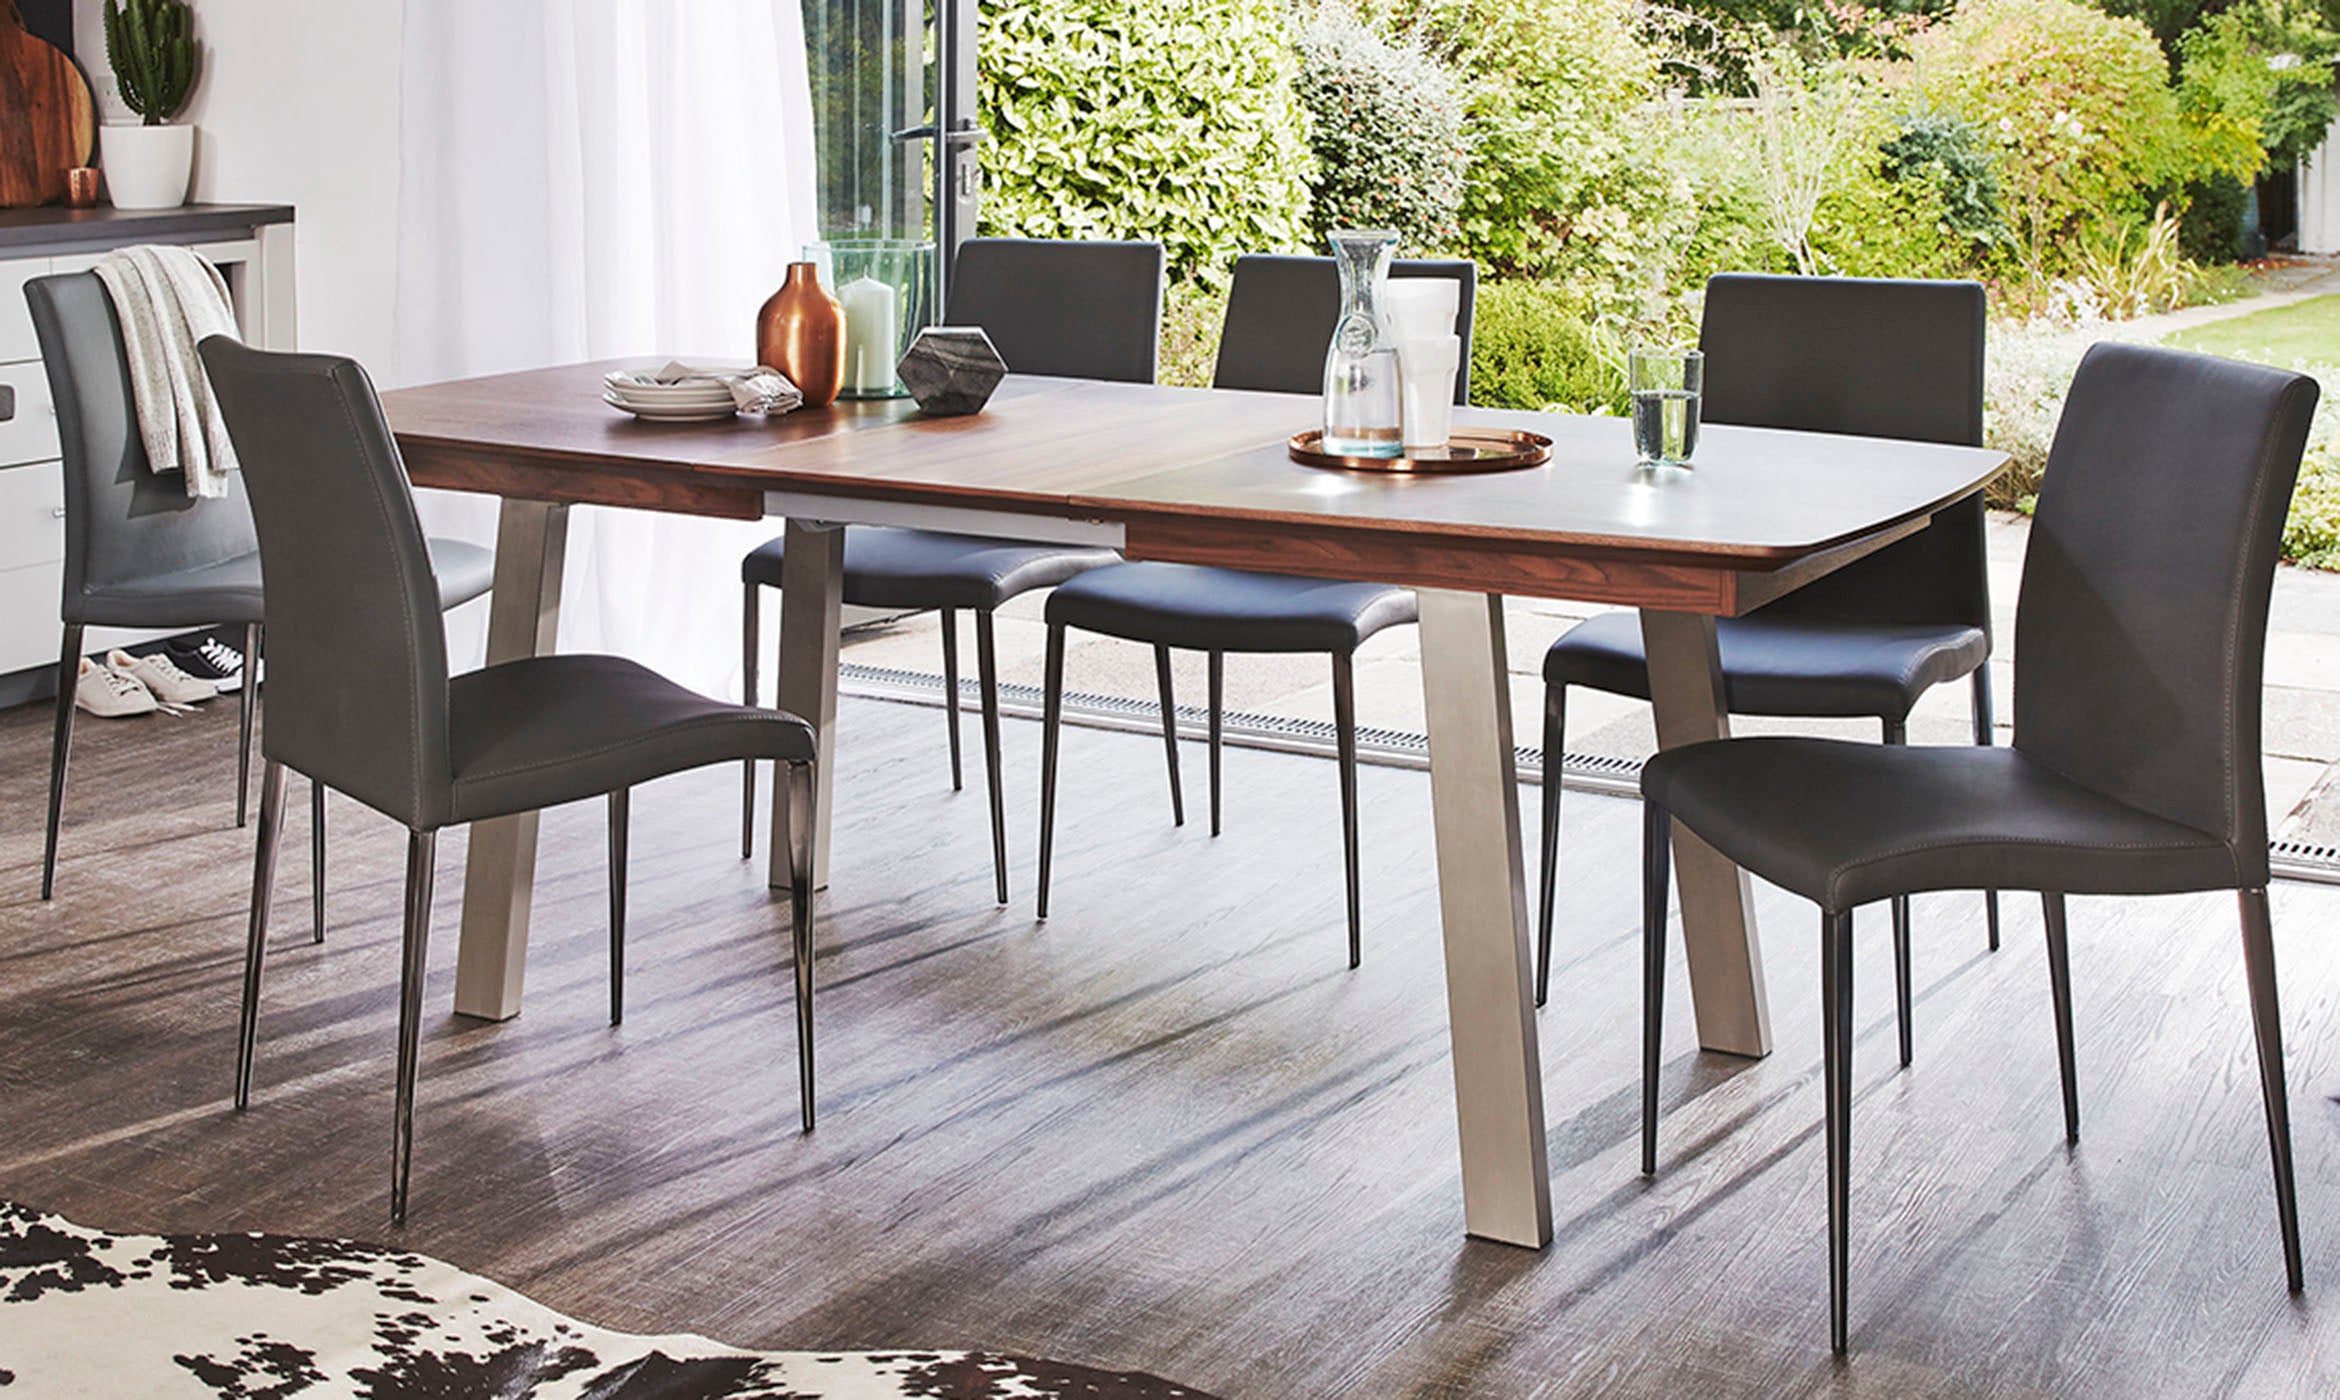 Stylish, Modern Elise Dining Chair – Product of the Week